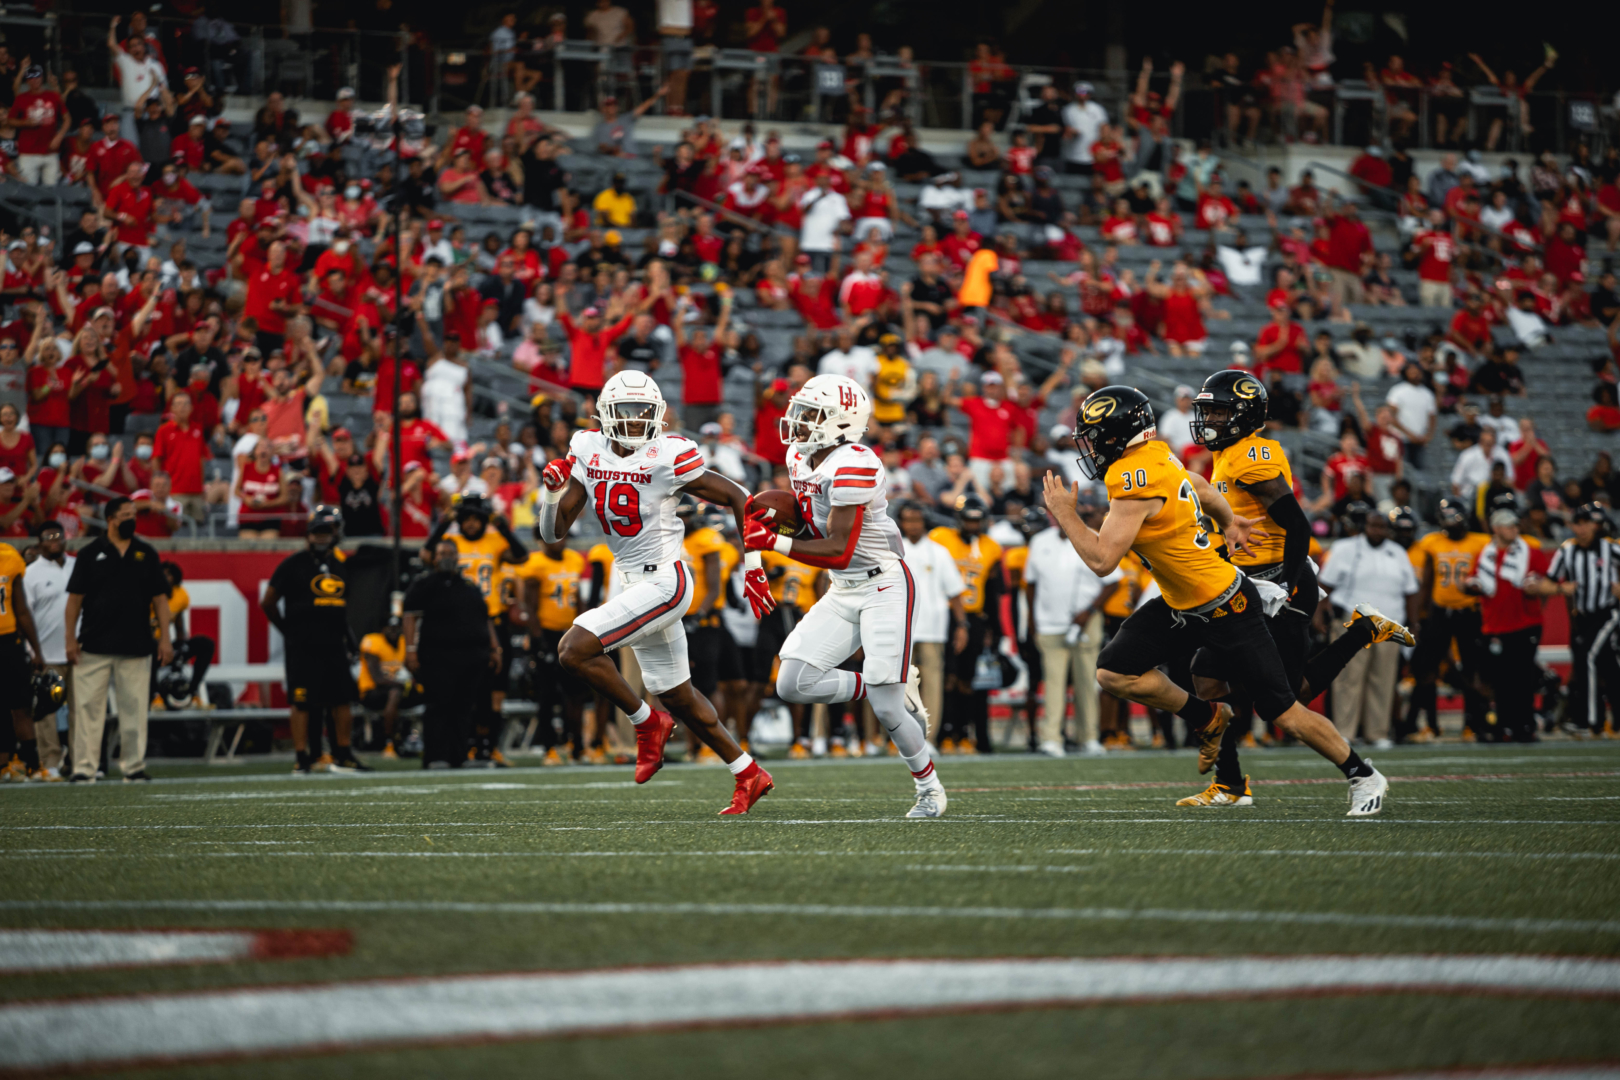 Senior cornerback Marcus Jones returned a punt 48 yards for a touchdown in UH football's route of Grambling. | James Schillinger/The Cougar